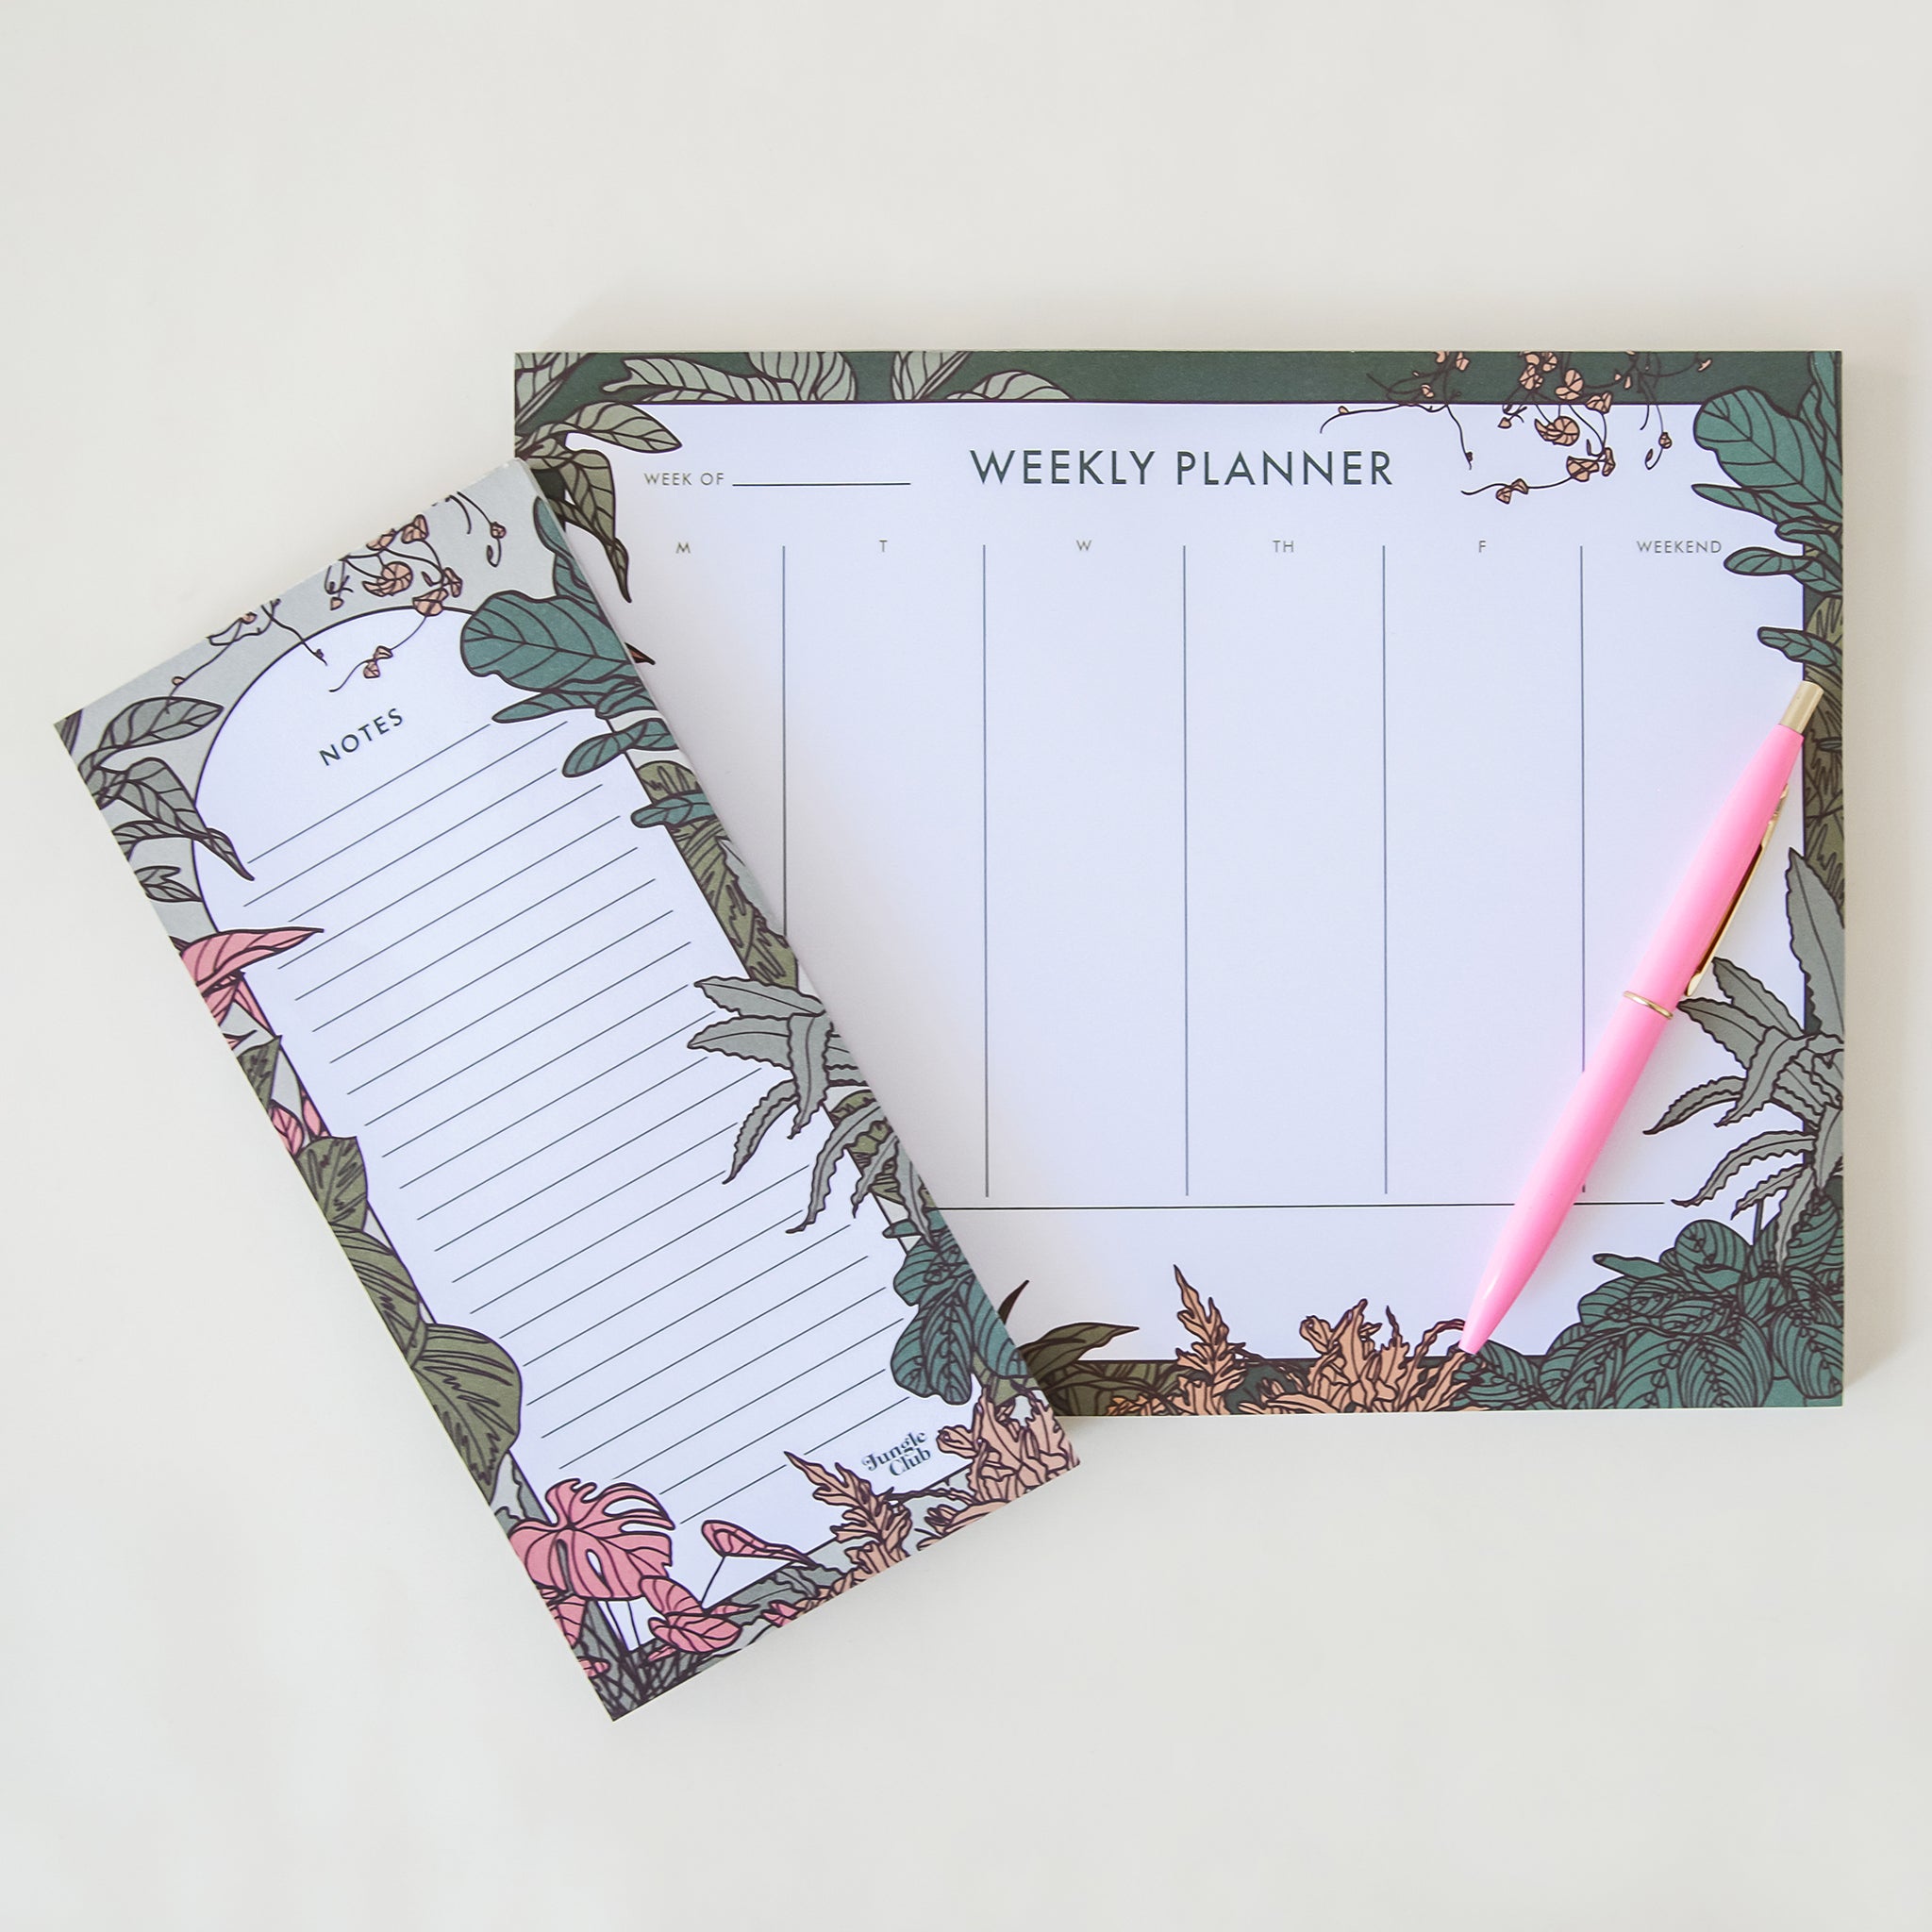 a notepad with pink and green plant illustrations lays with a weekly planner notepad with similar illustrations and a pink pen lays on top. all lay on a white ground. 